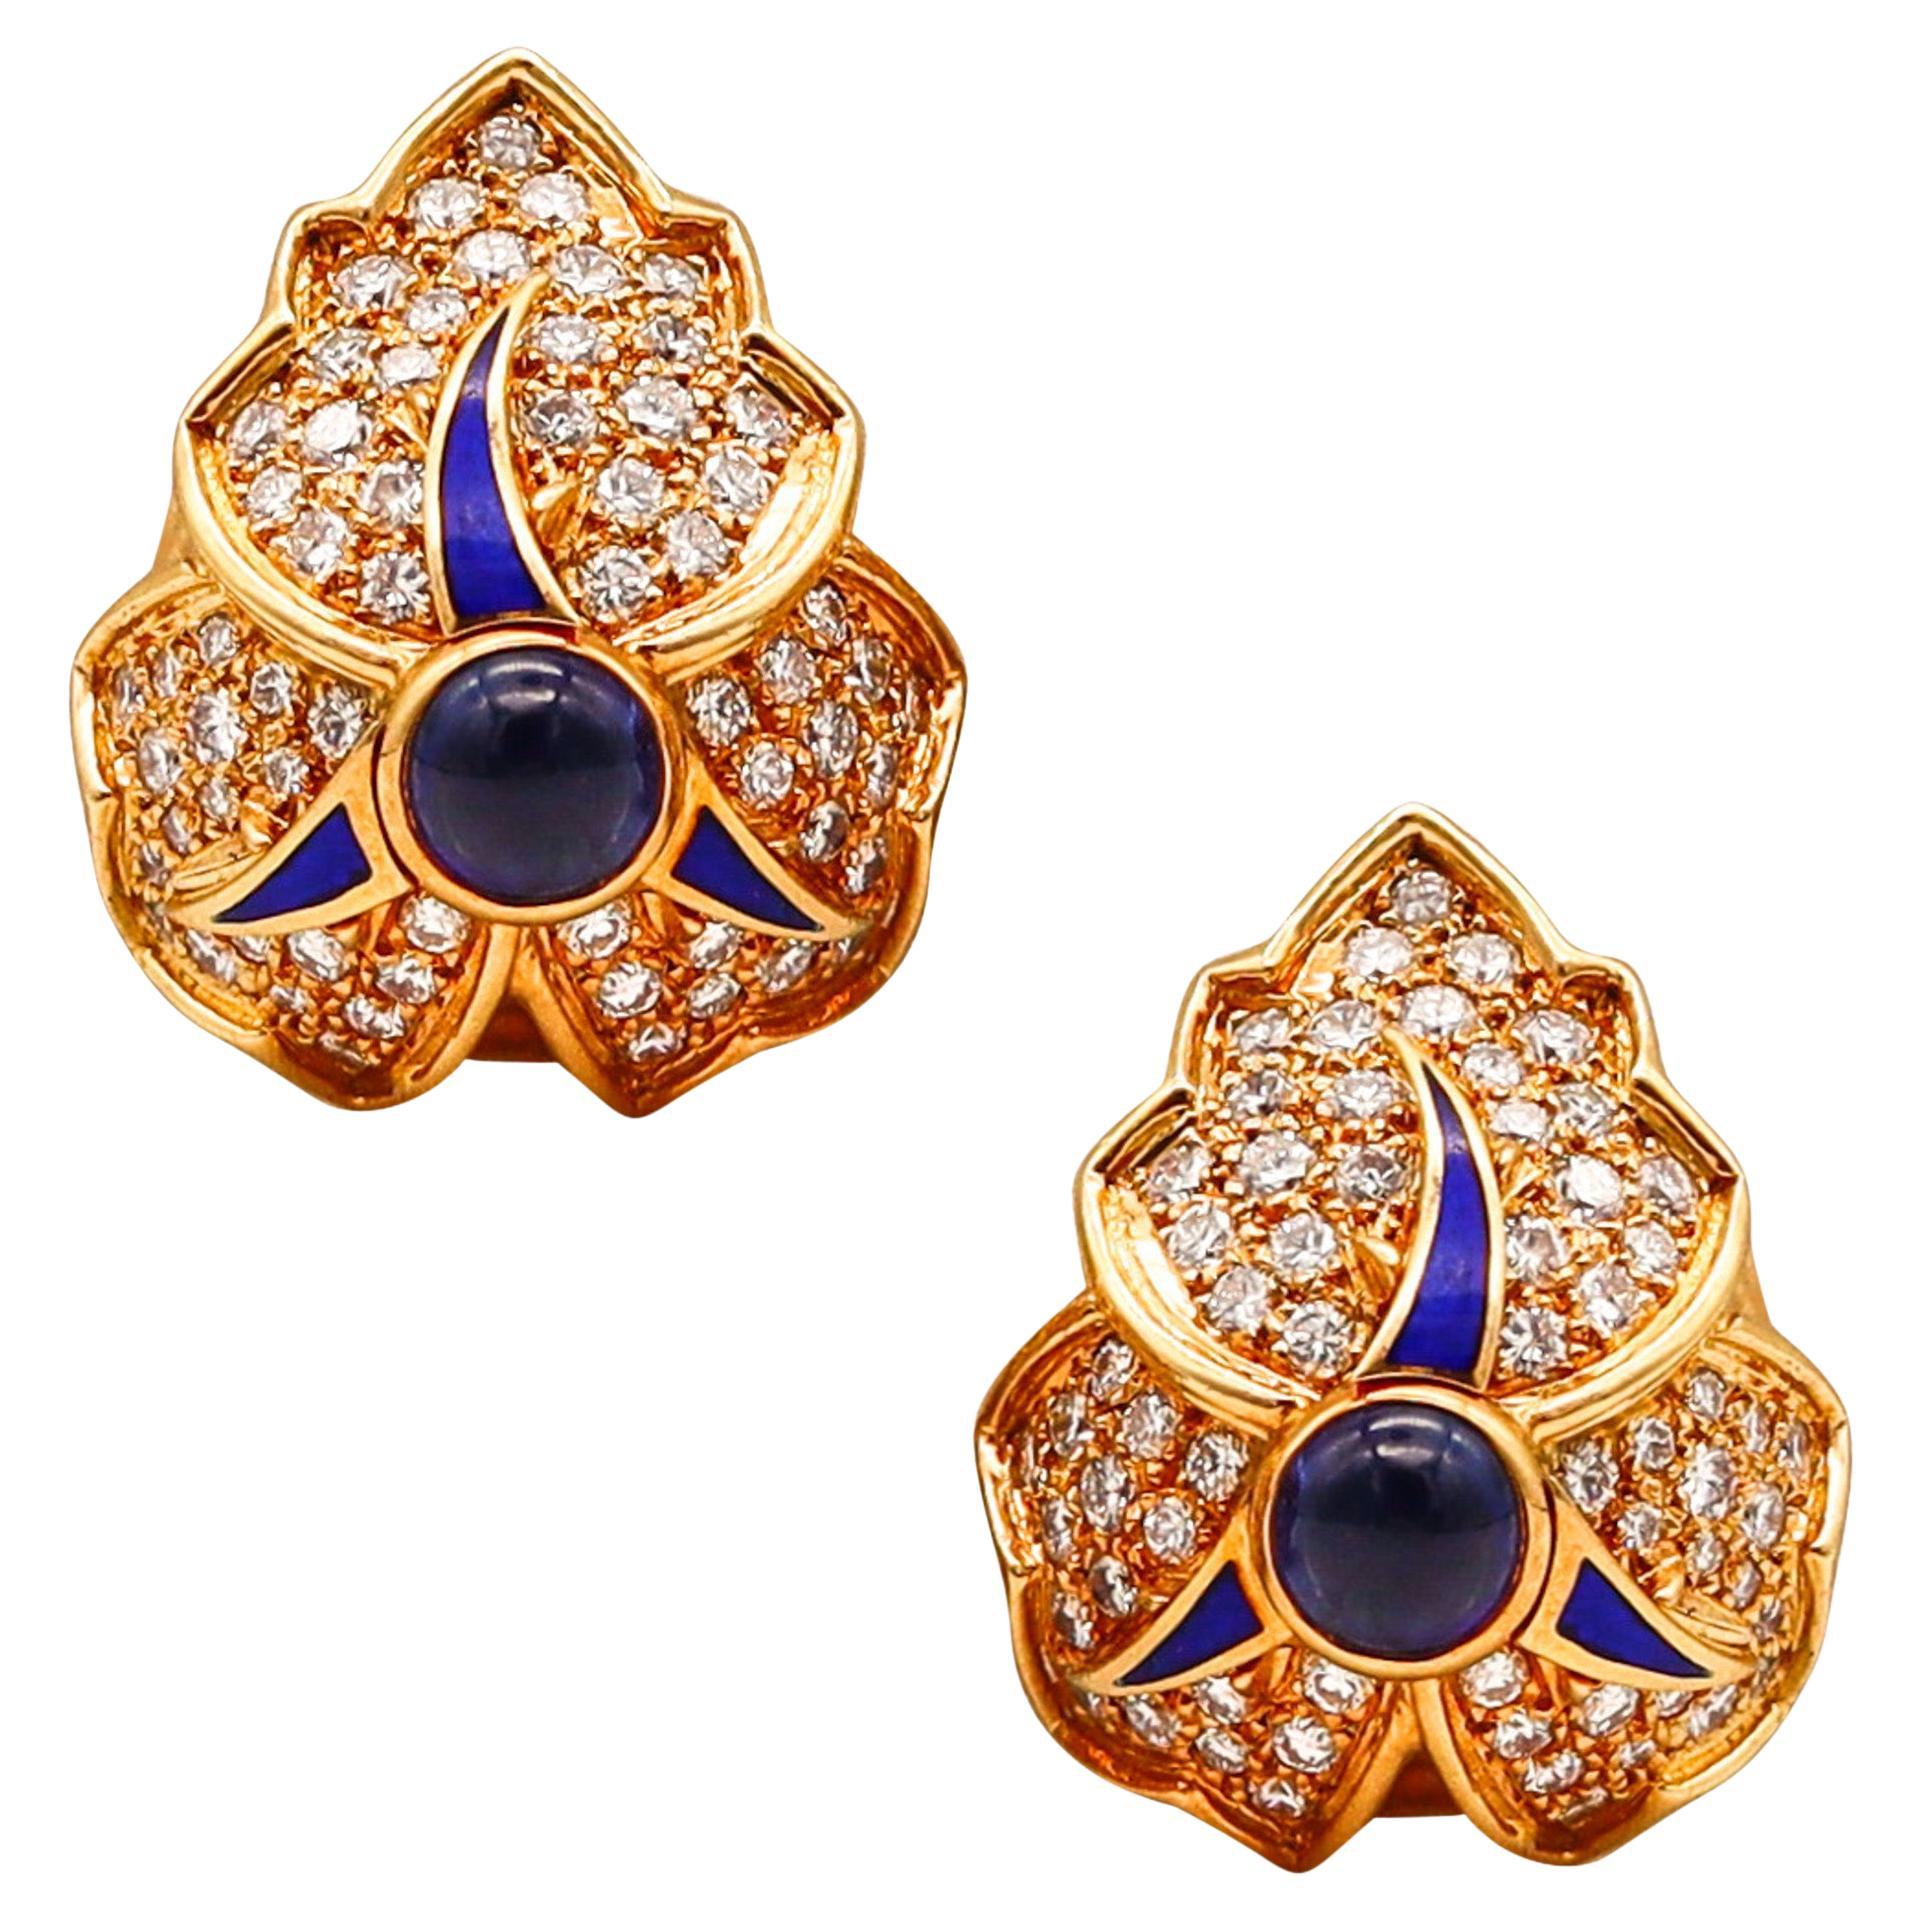 Chaumet Paris Clip On Earrings In 18Kt Gold With 5.64 Ctw Sapphires & Diamonds For Sale